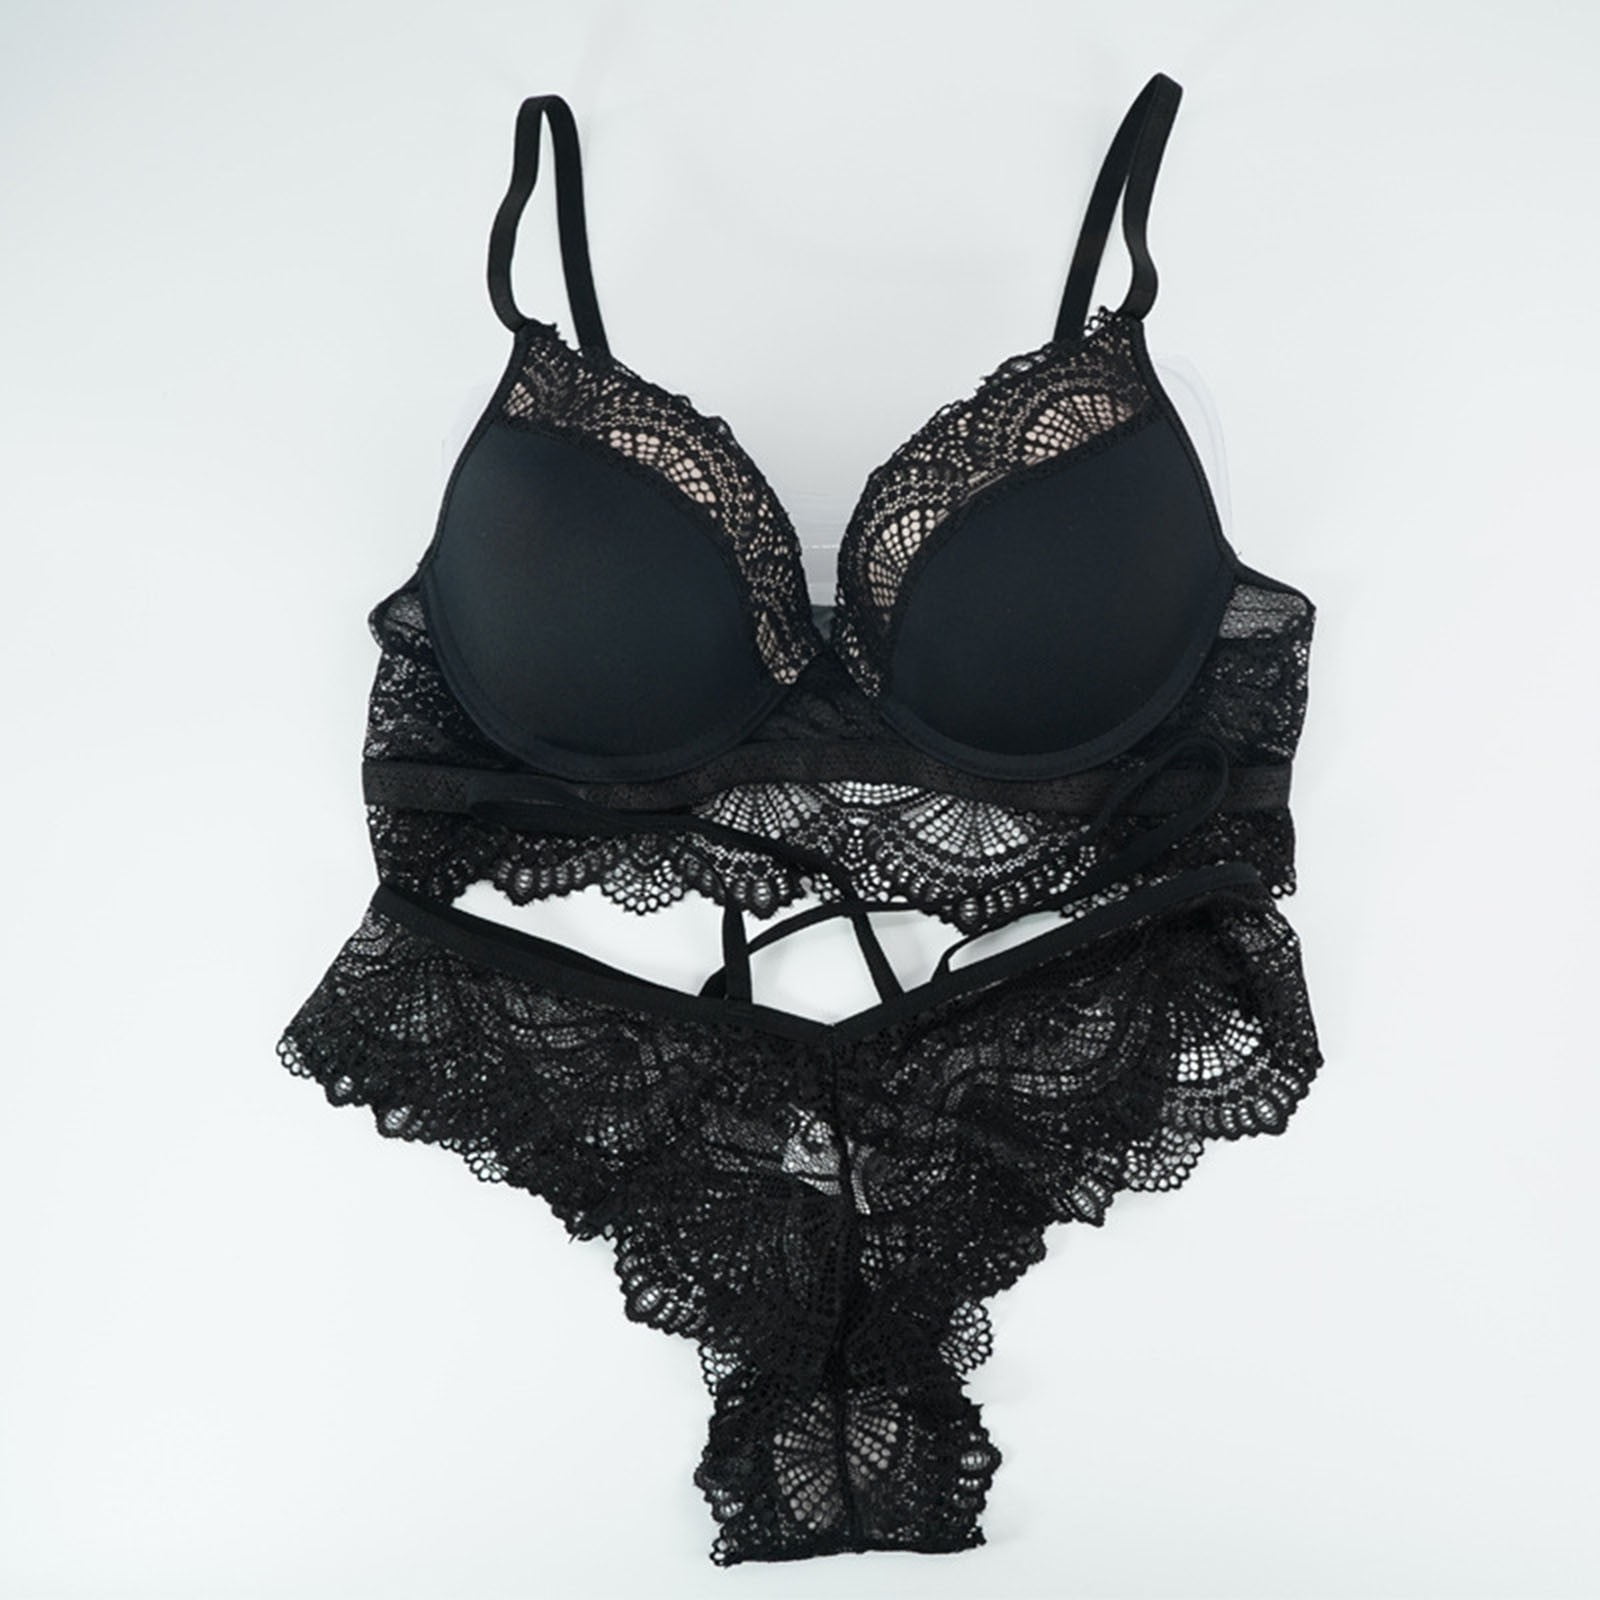 2021Fanshion Womens Satin Lace Embroidered Bra And Panty Set Back Sexy And Cute  Underwear With Big Cup Available In BC Sizes 70 80 Black Y2302 From  Misihan09, $10.93